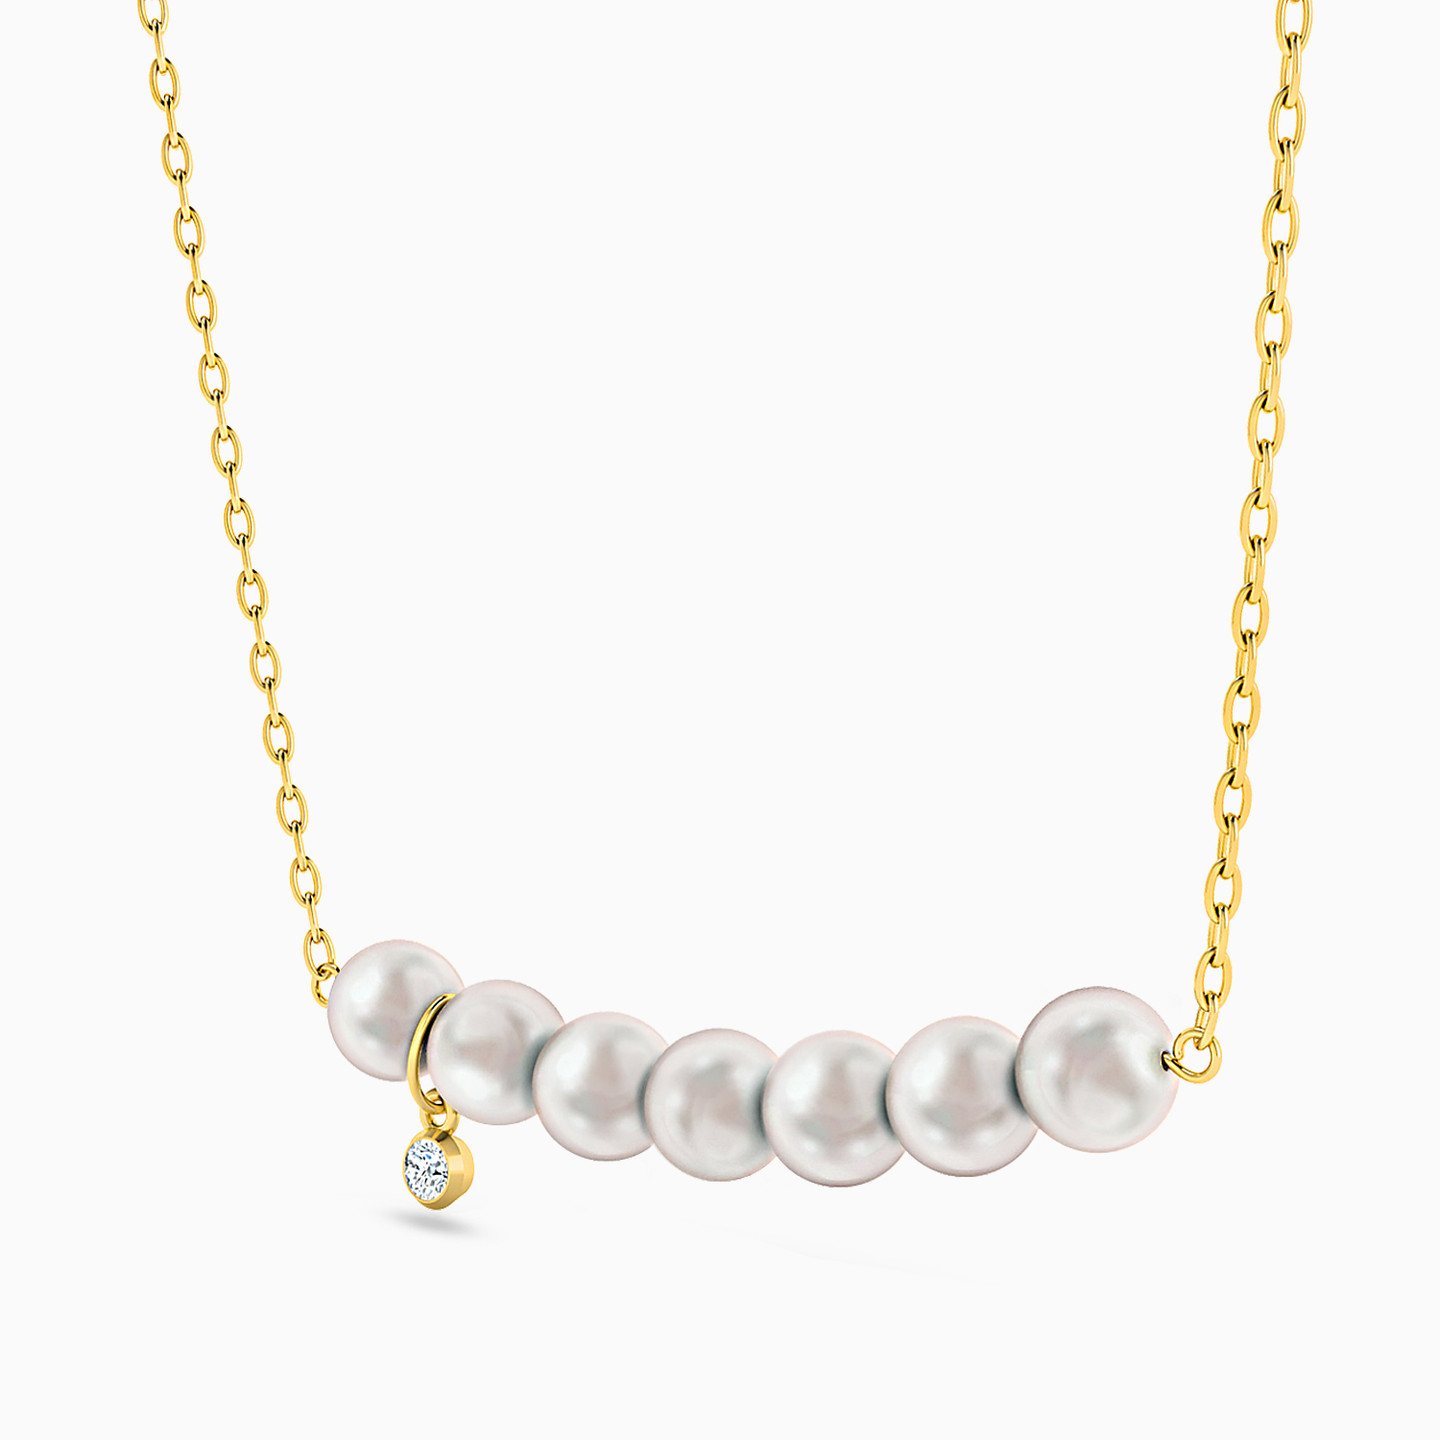 18K Gold Pearls Chain Necklace - 2